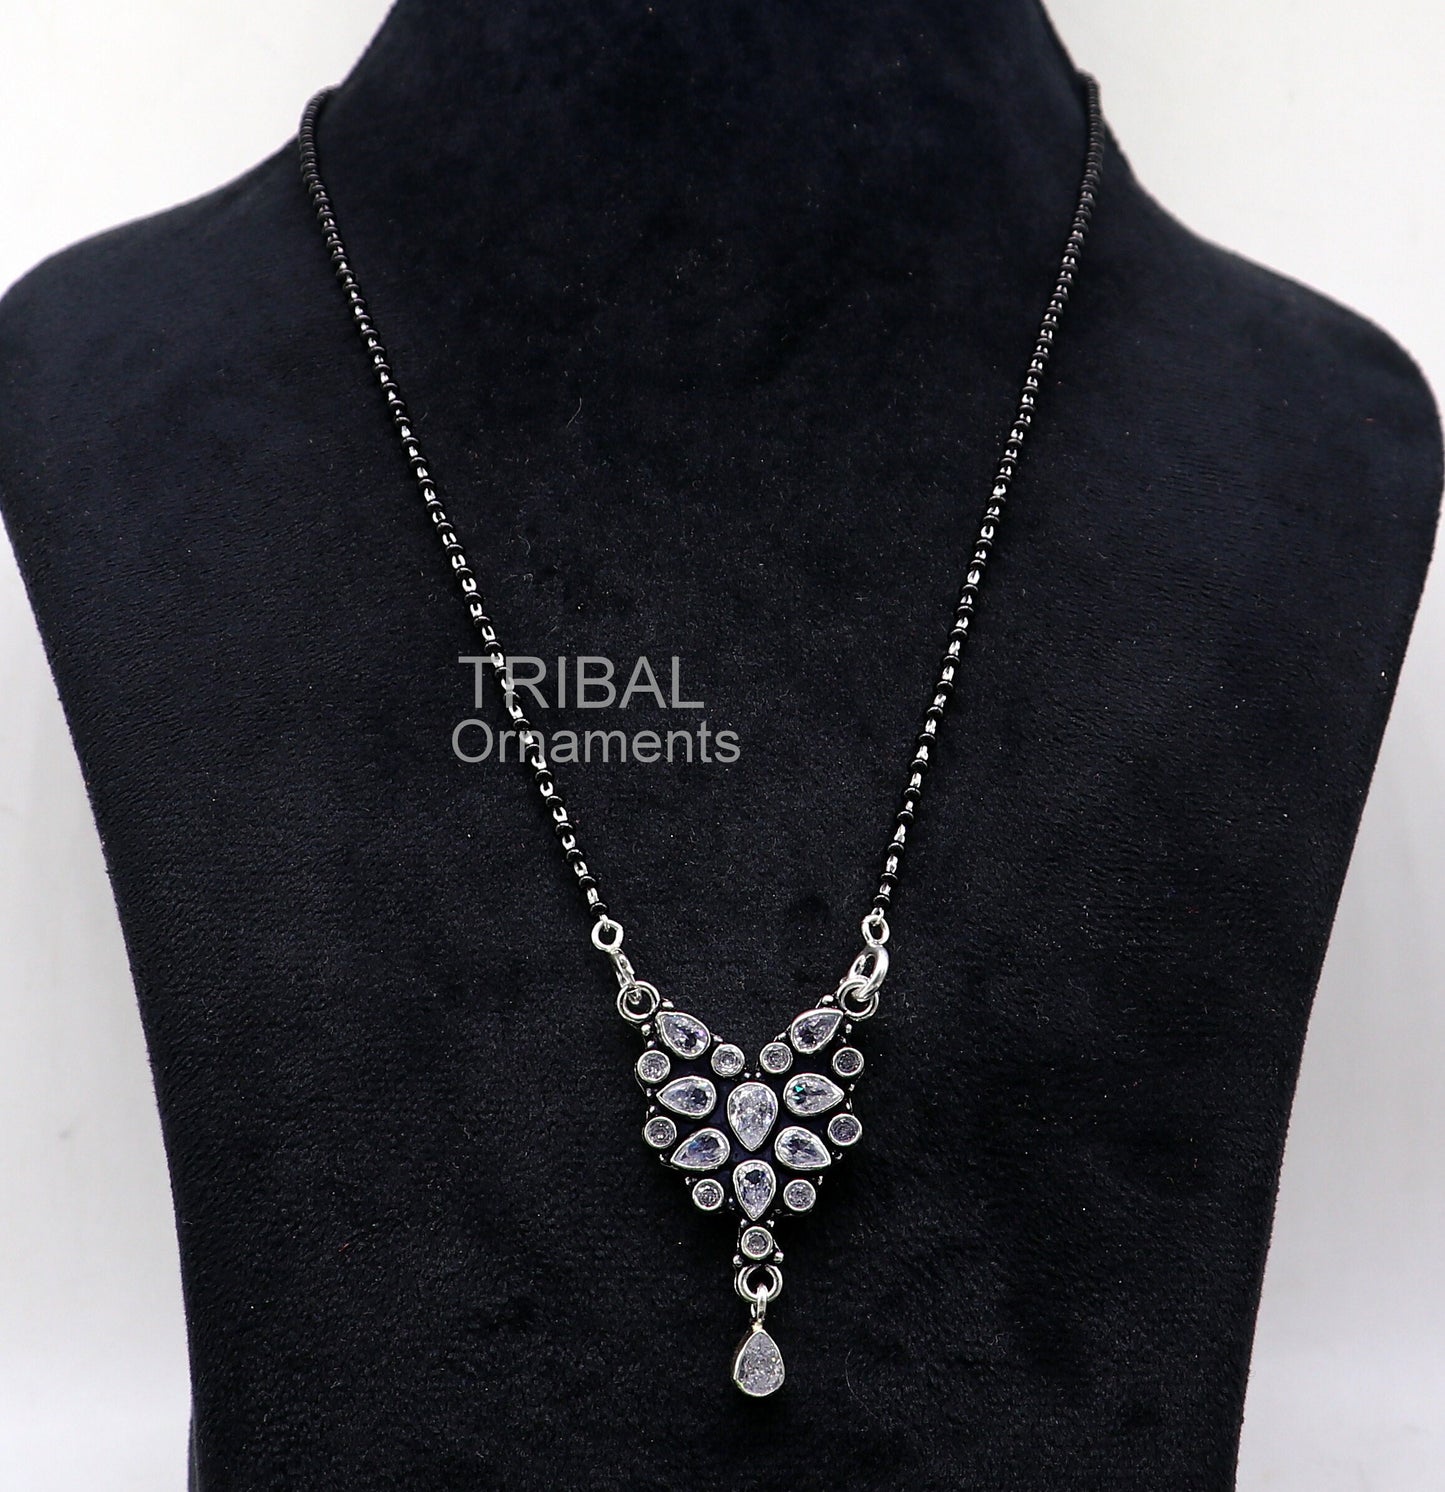 Awesome 925 sterling silver black beads chain necklace, gorgeous flower design pendant, traditional style brides mangalsutra necklace ms18 - TRIBAL ORNAMENTS